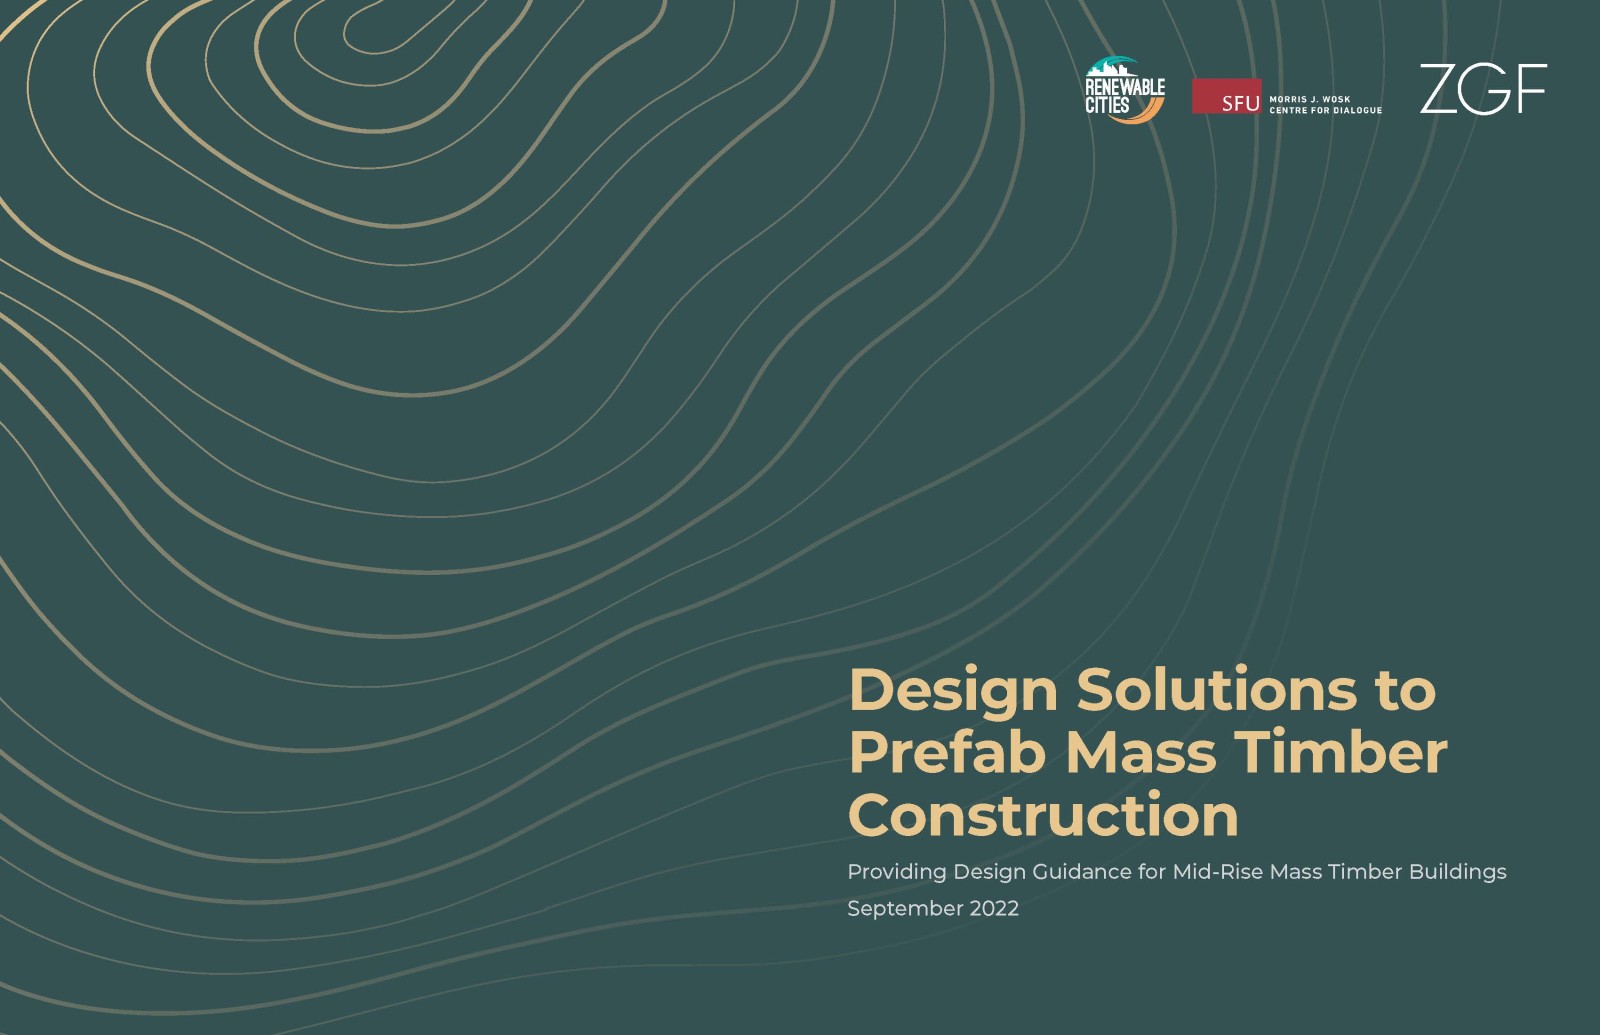 Design Guidelines to Prefab Mass Timber Construction